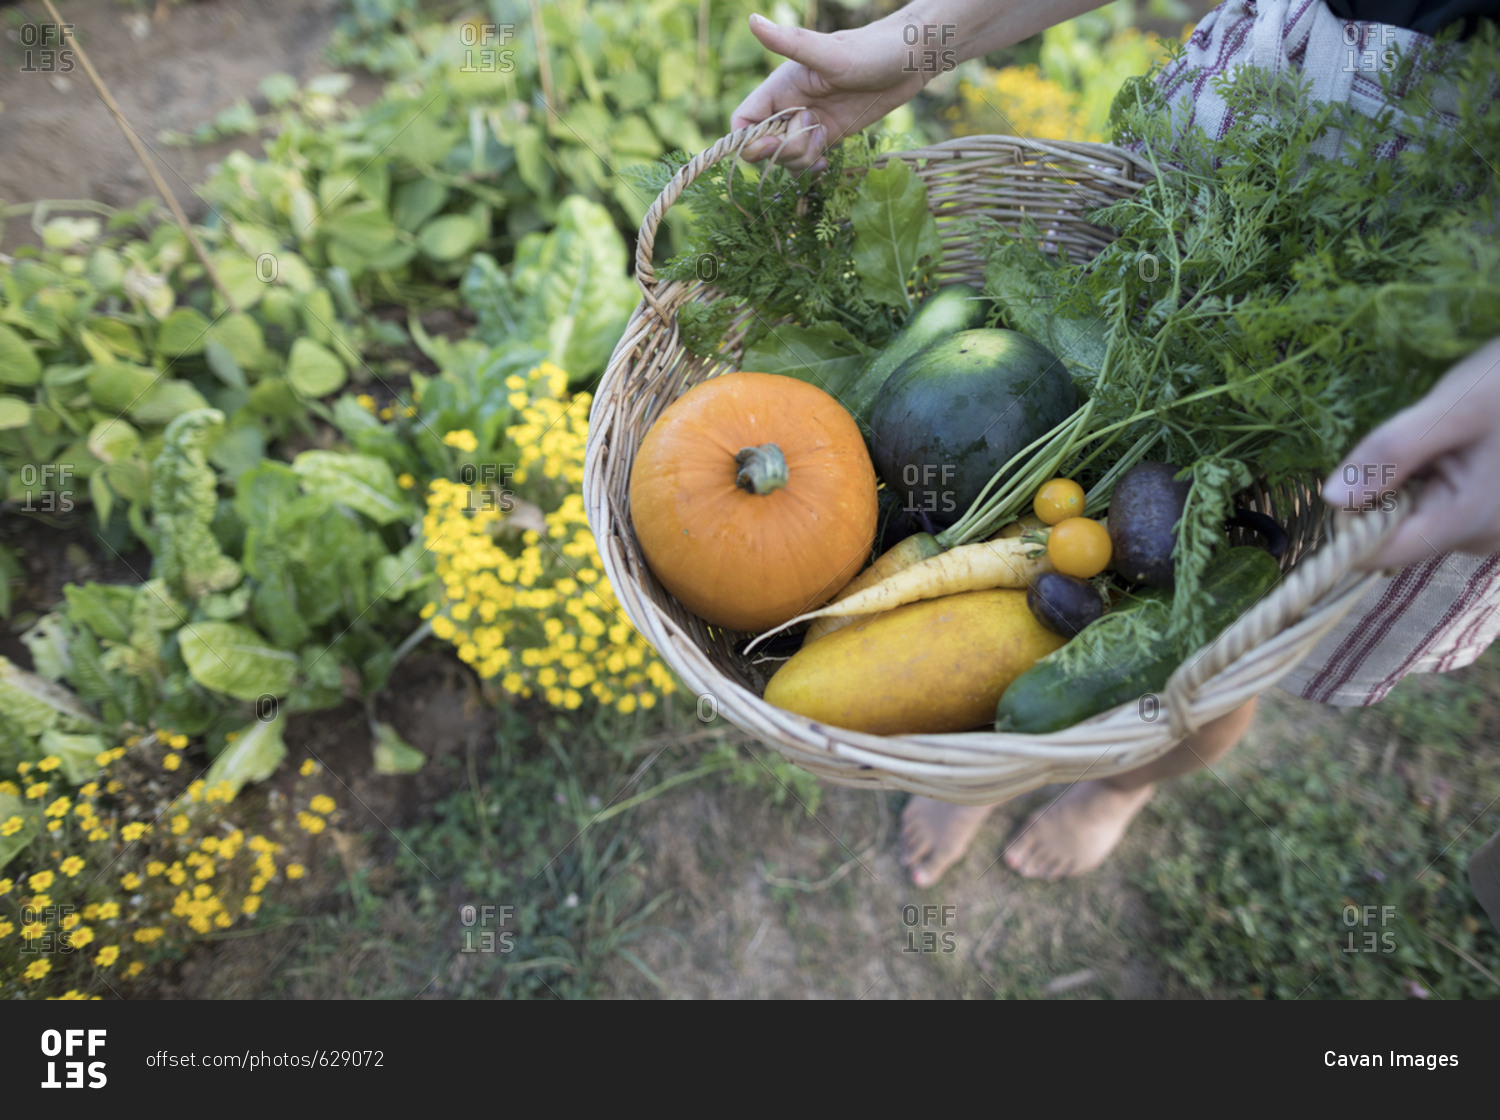 Low section of woman holding vegetables in basket while standing at community garden